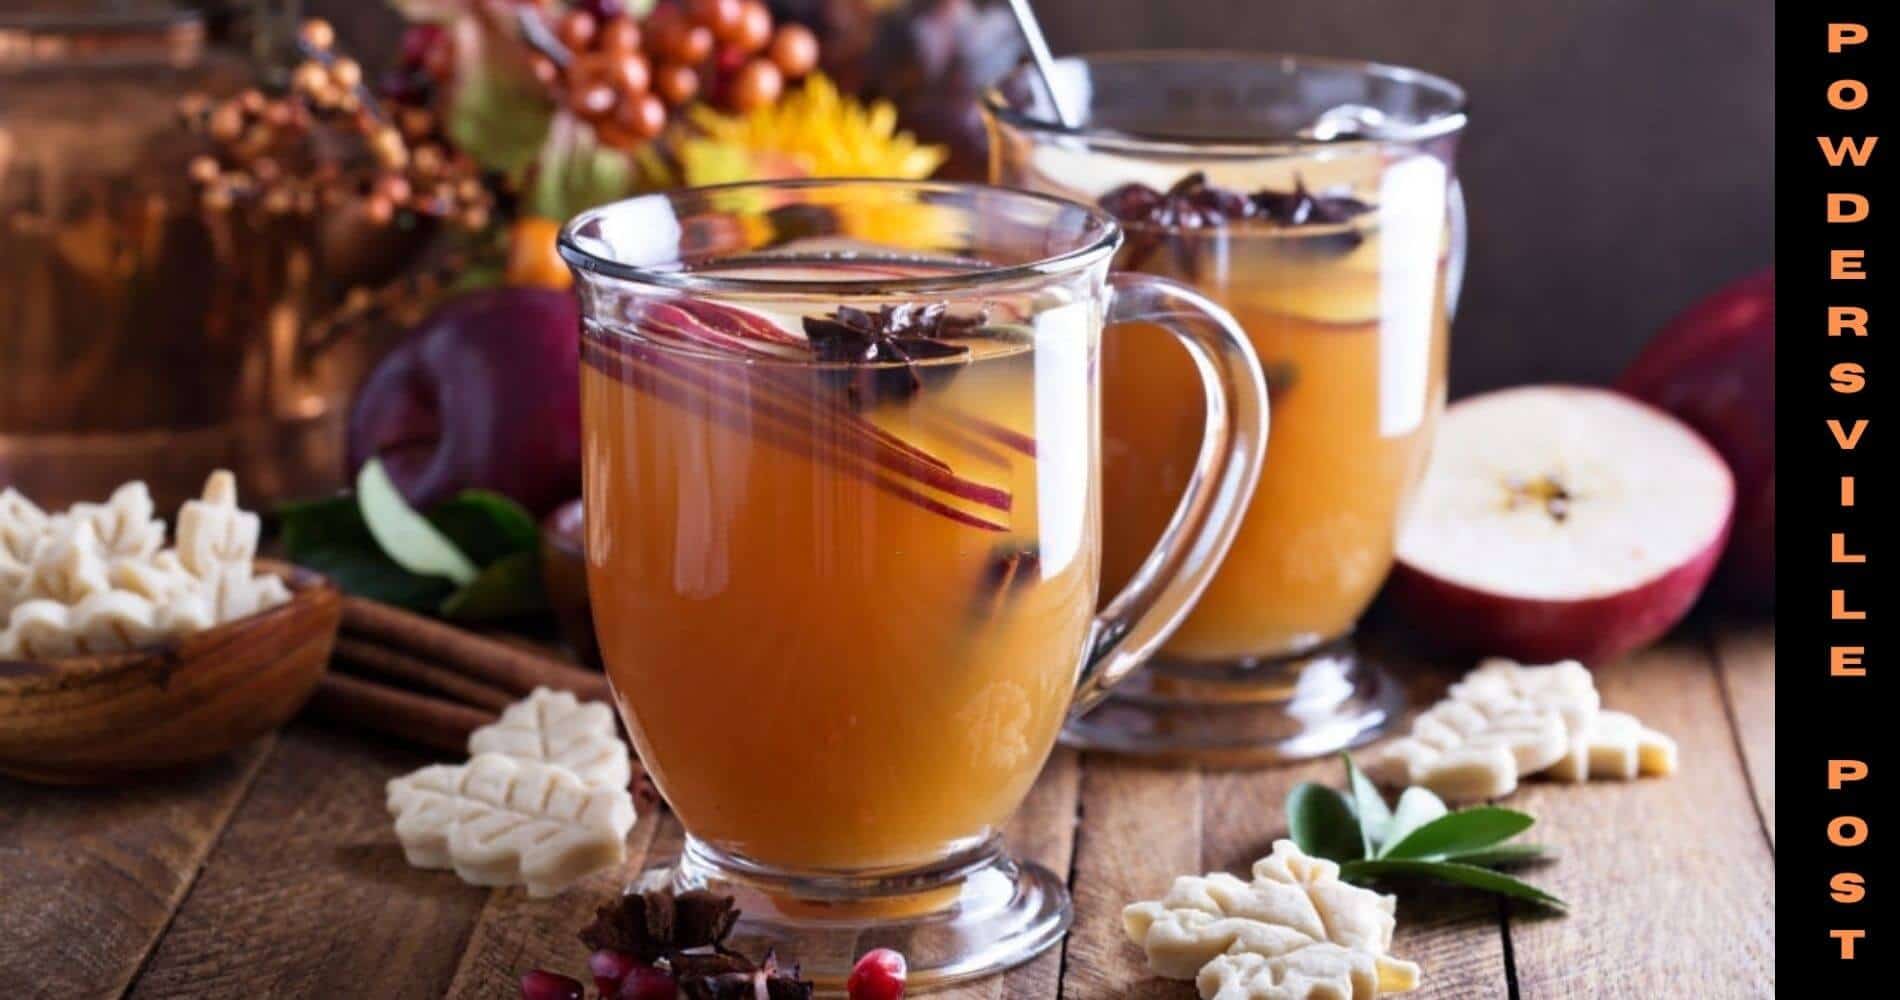 Treat-Yourself-To-Some-Refreshing-Winter-Drinks-This-Year